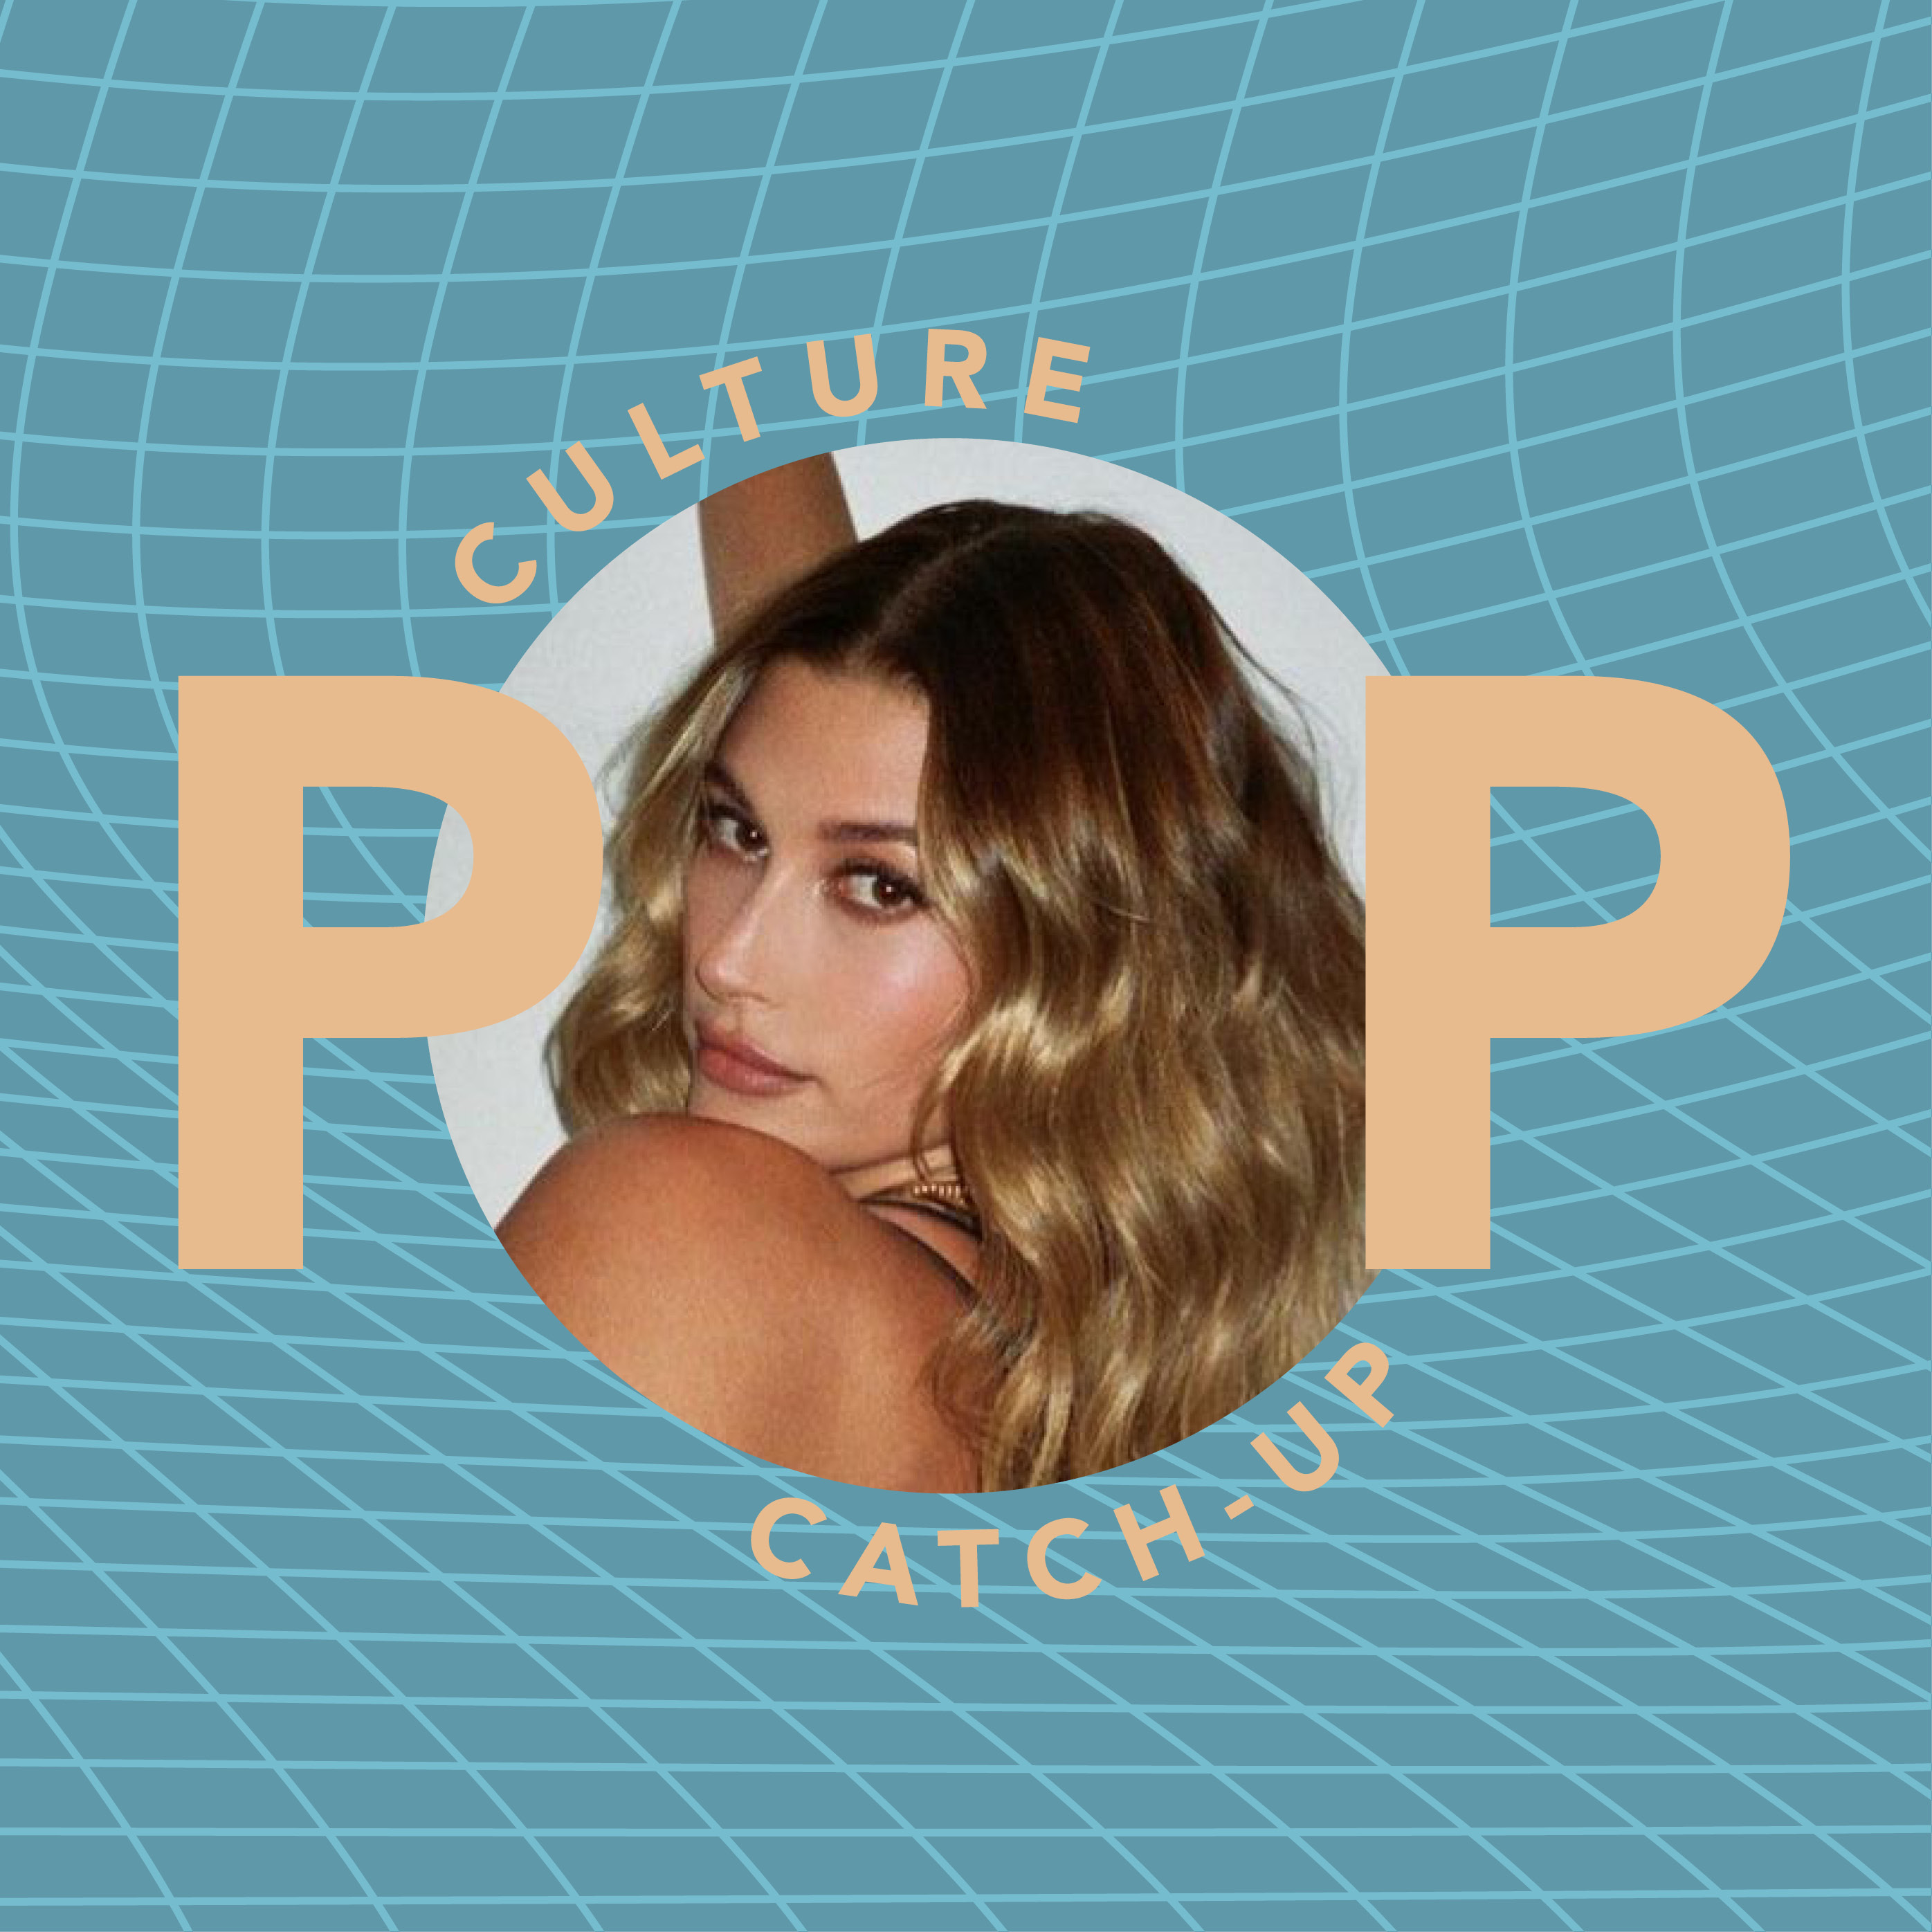 Pop Culture Catch-Up: Beyoncé wants to slow down, Anne Hathaway wants to right a wrong, and more